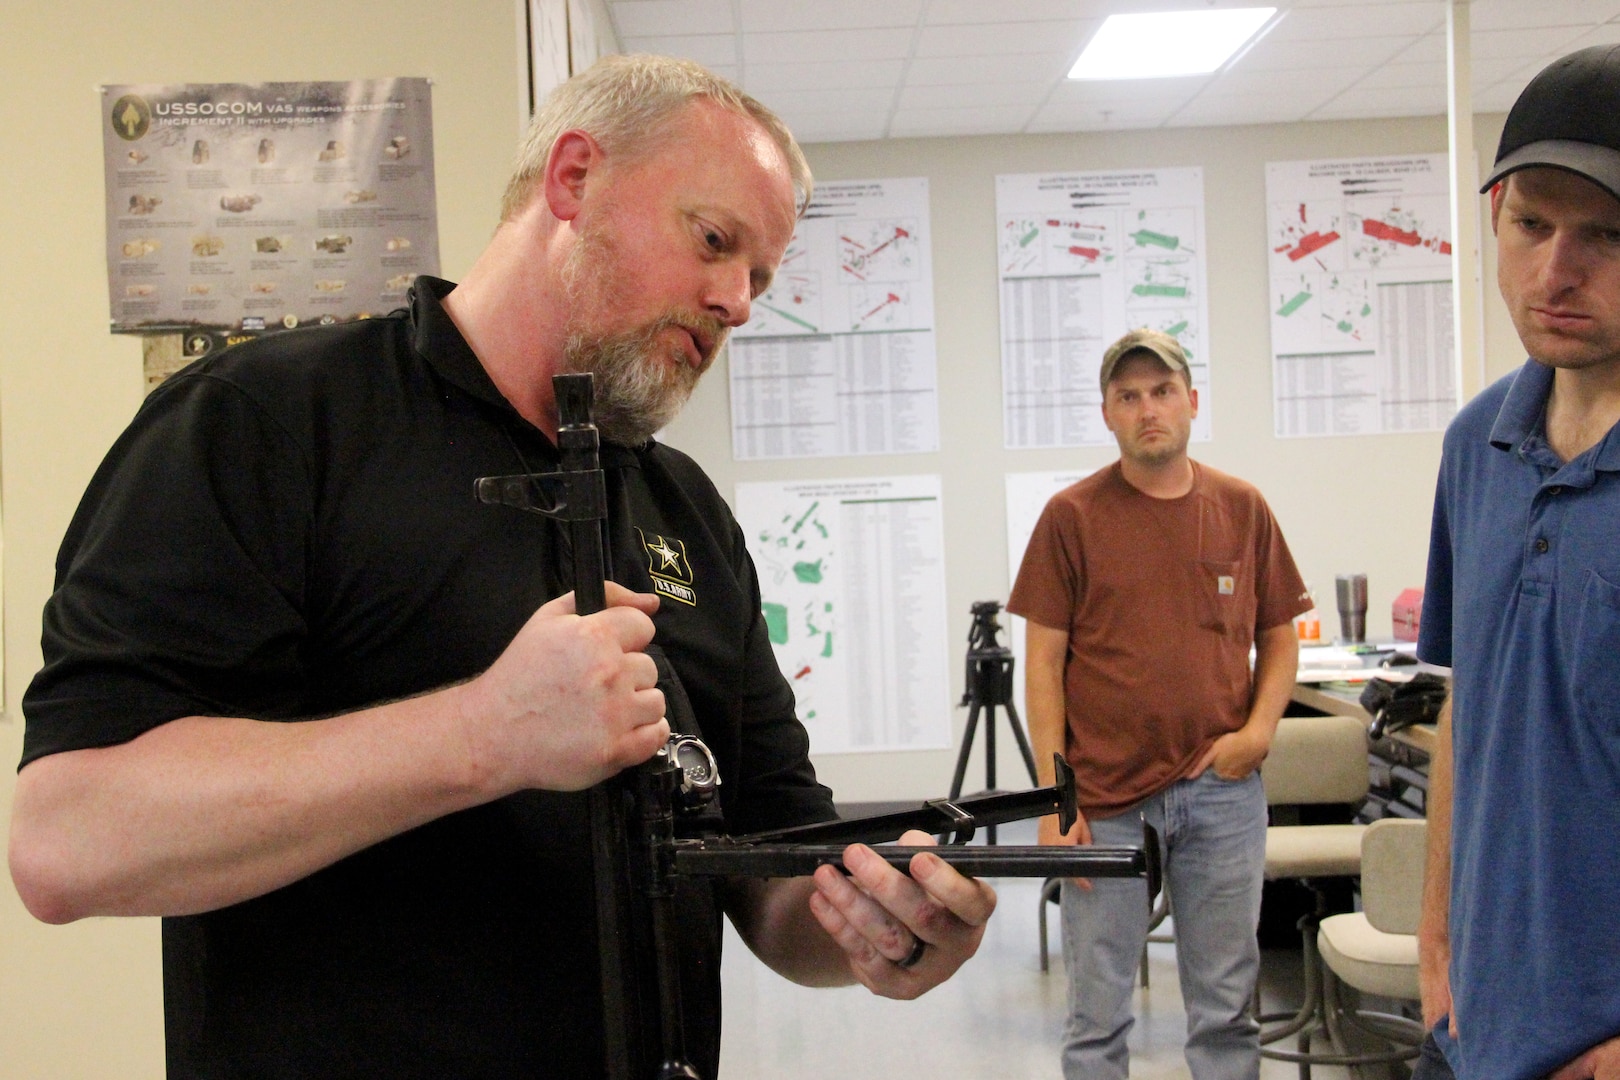 Naval Surface Warfare Center, Crane Division (NSWC Crane) hosted Expeditionary professionals for its first Light Weapon Design Course led by Cranfield University, a postgraduate university based in the United Kingdom that specializes in defense technology.